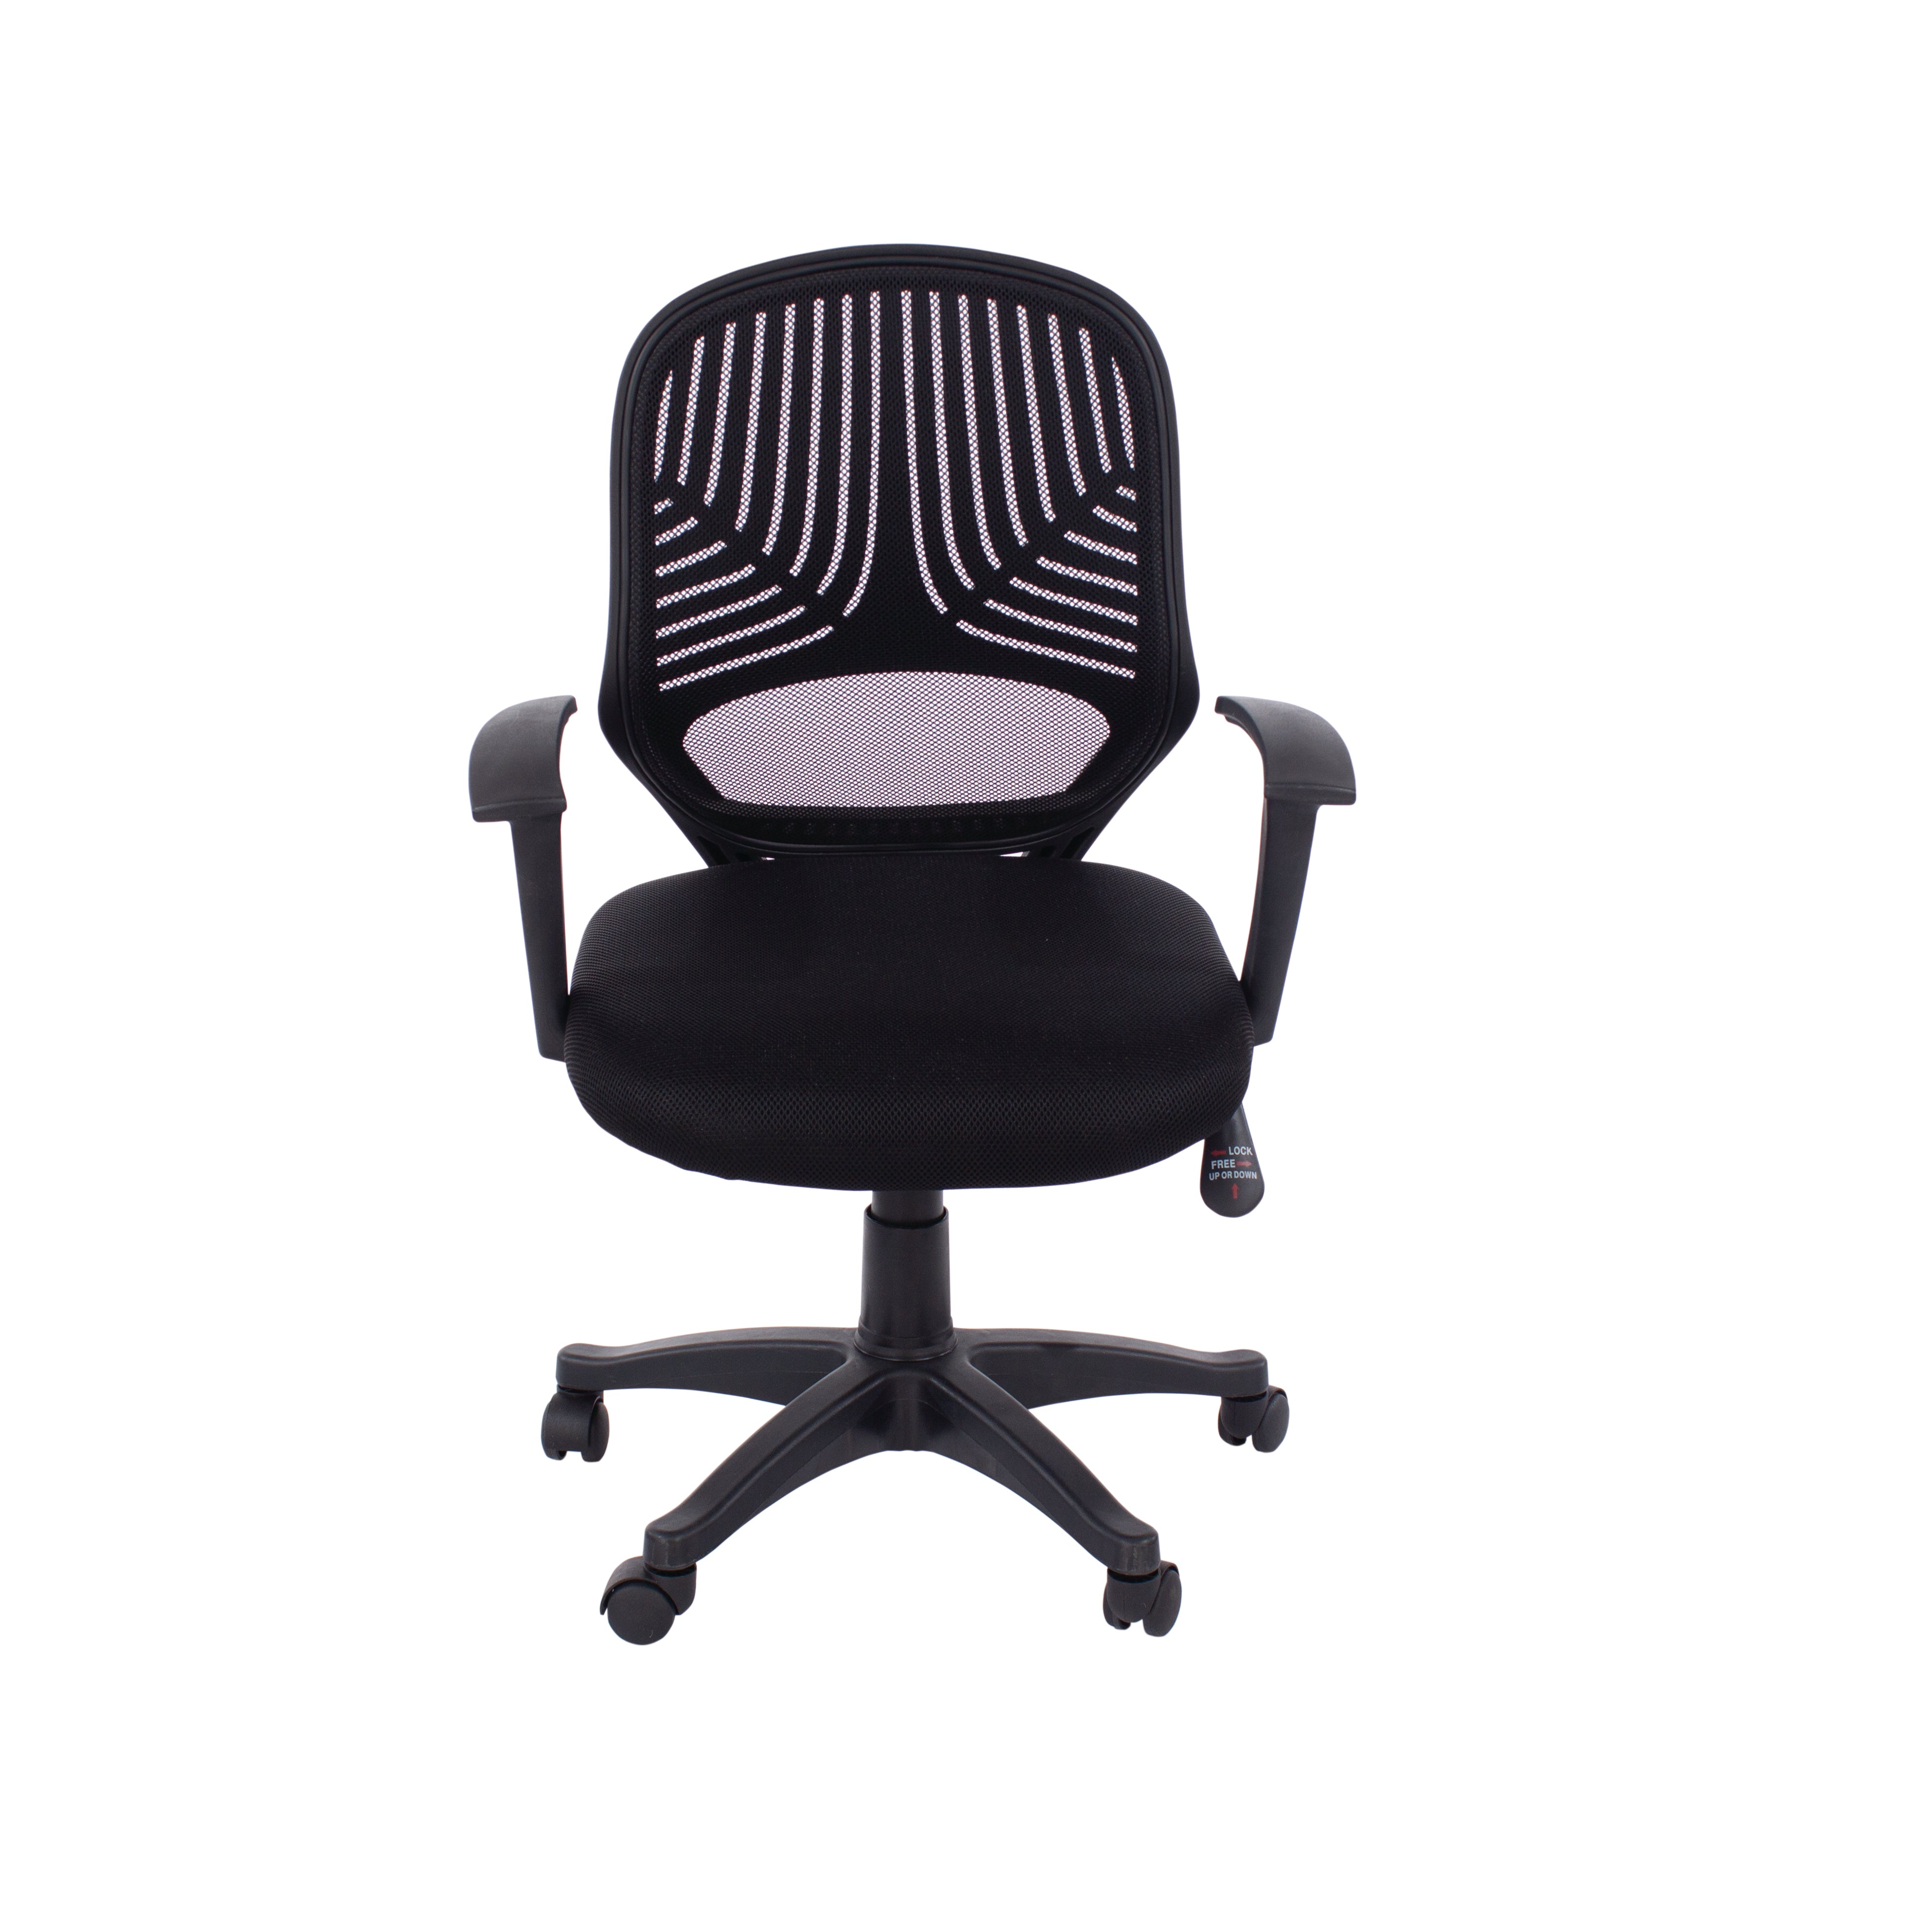 Home Office Chair In Black Mesh Back, Black Fabric Seat & Black Base